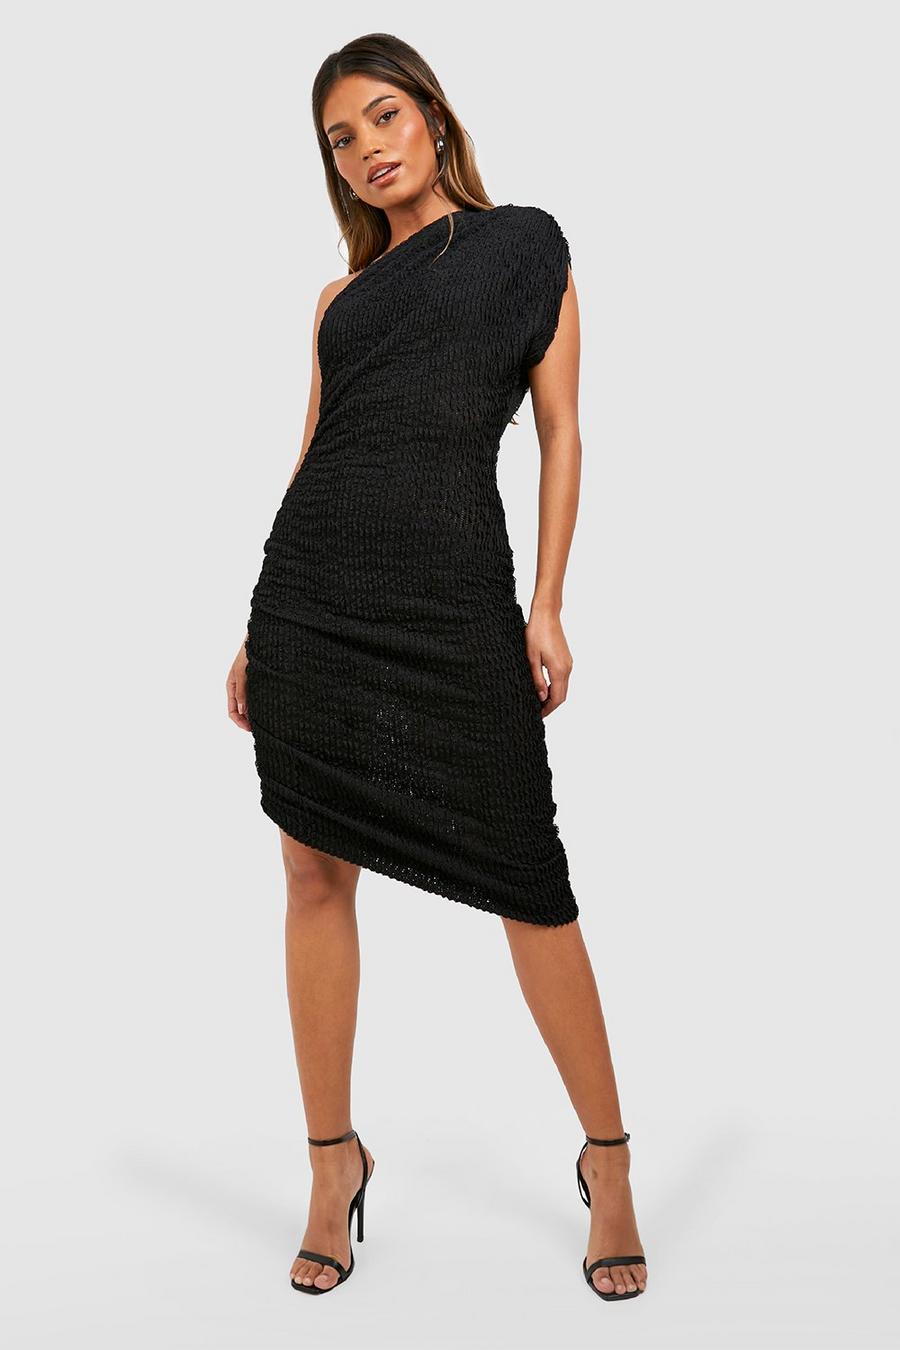 Black One Shoulder Knitted Assymetric Midaxi Dress